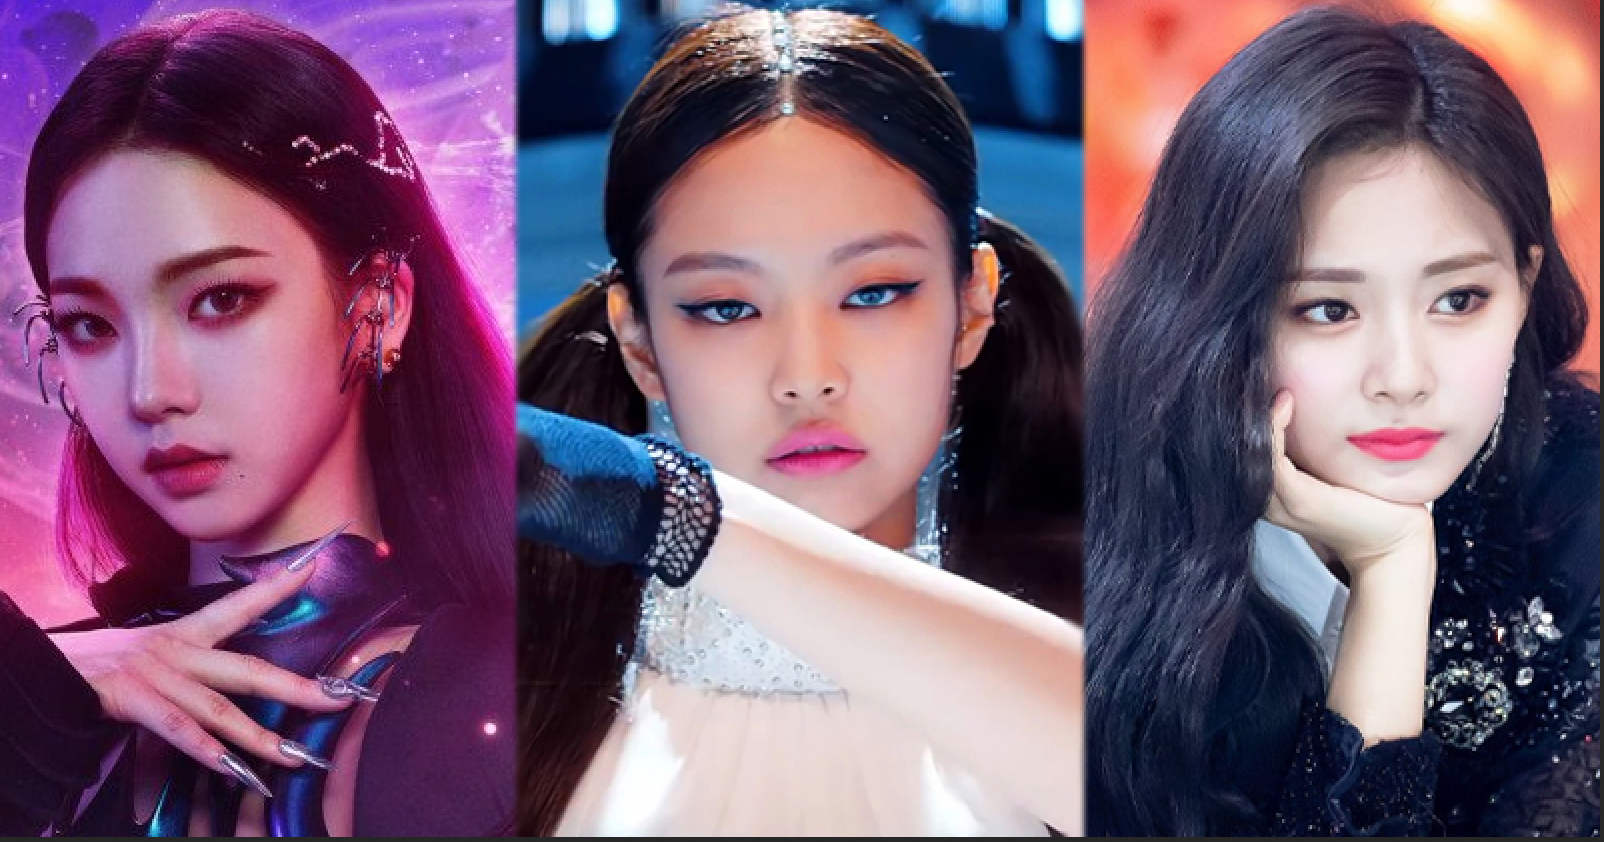 Makeup Style Analysis of aespa, BLACKPINK, and TWICE: Which Look Do You Prefer the Most?